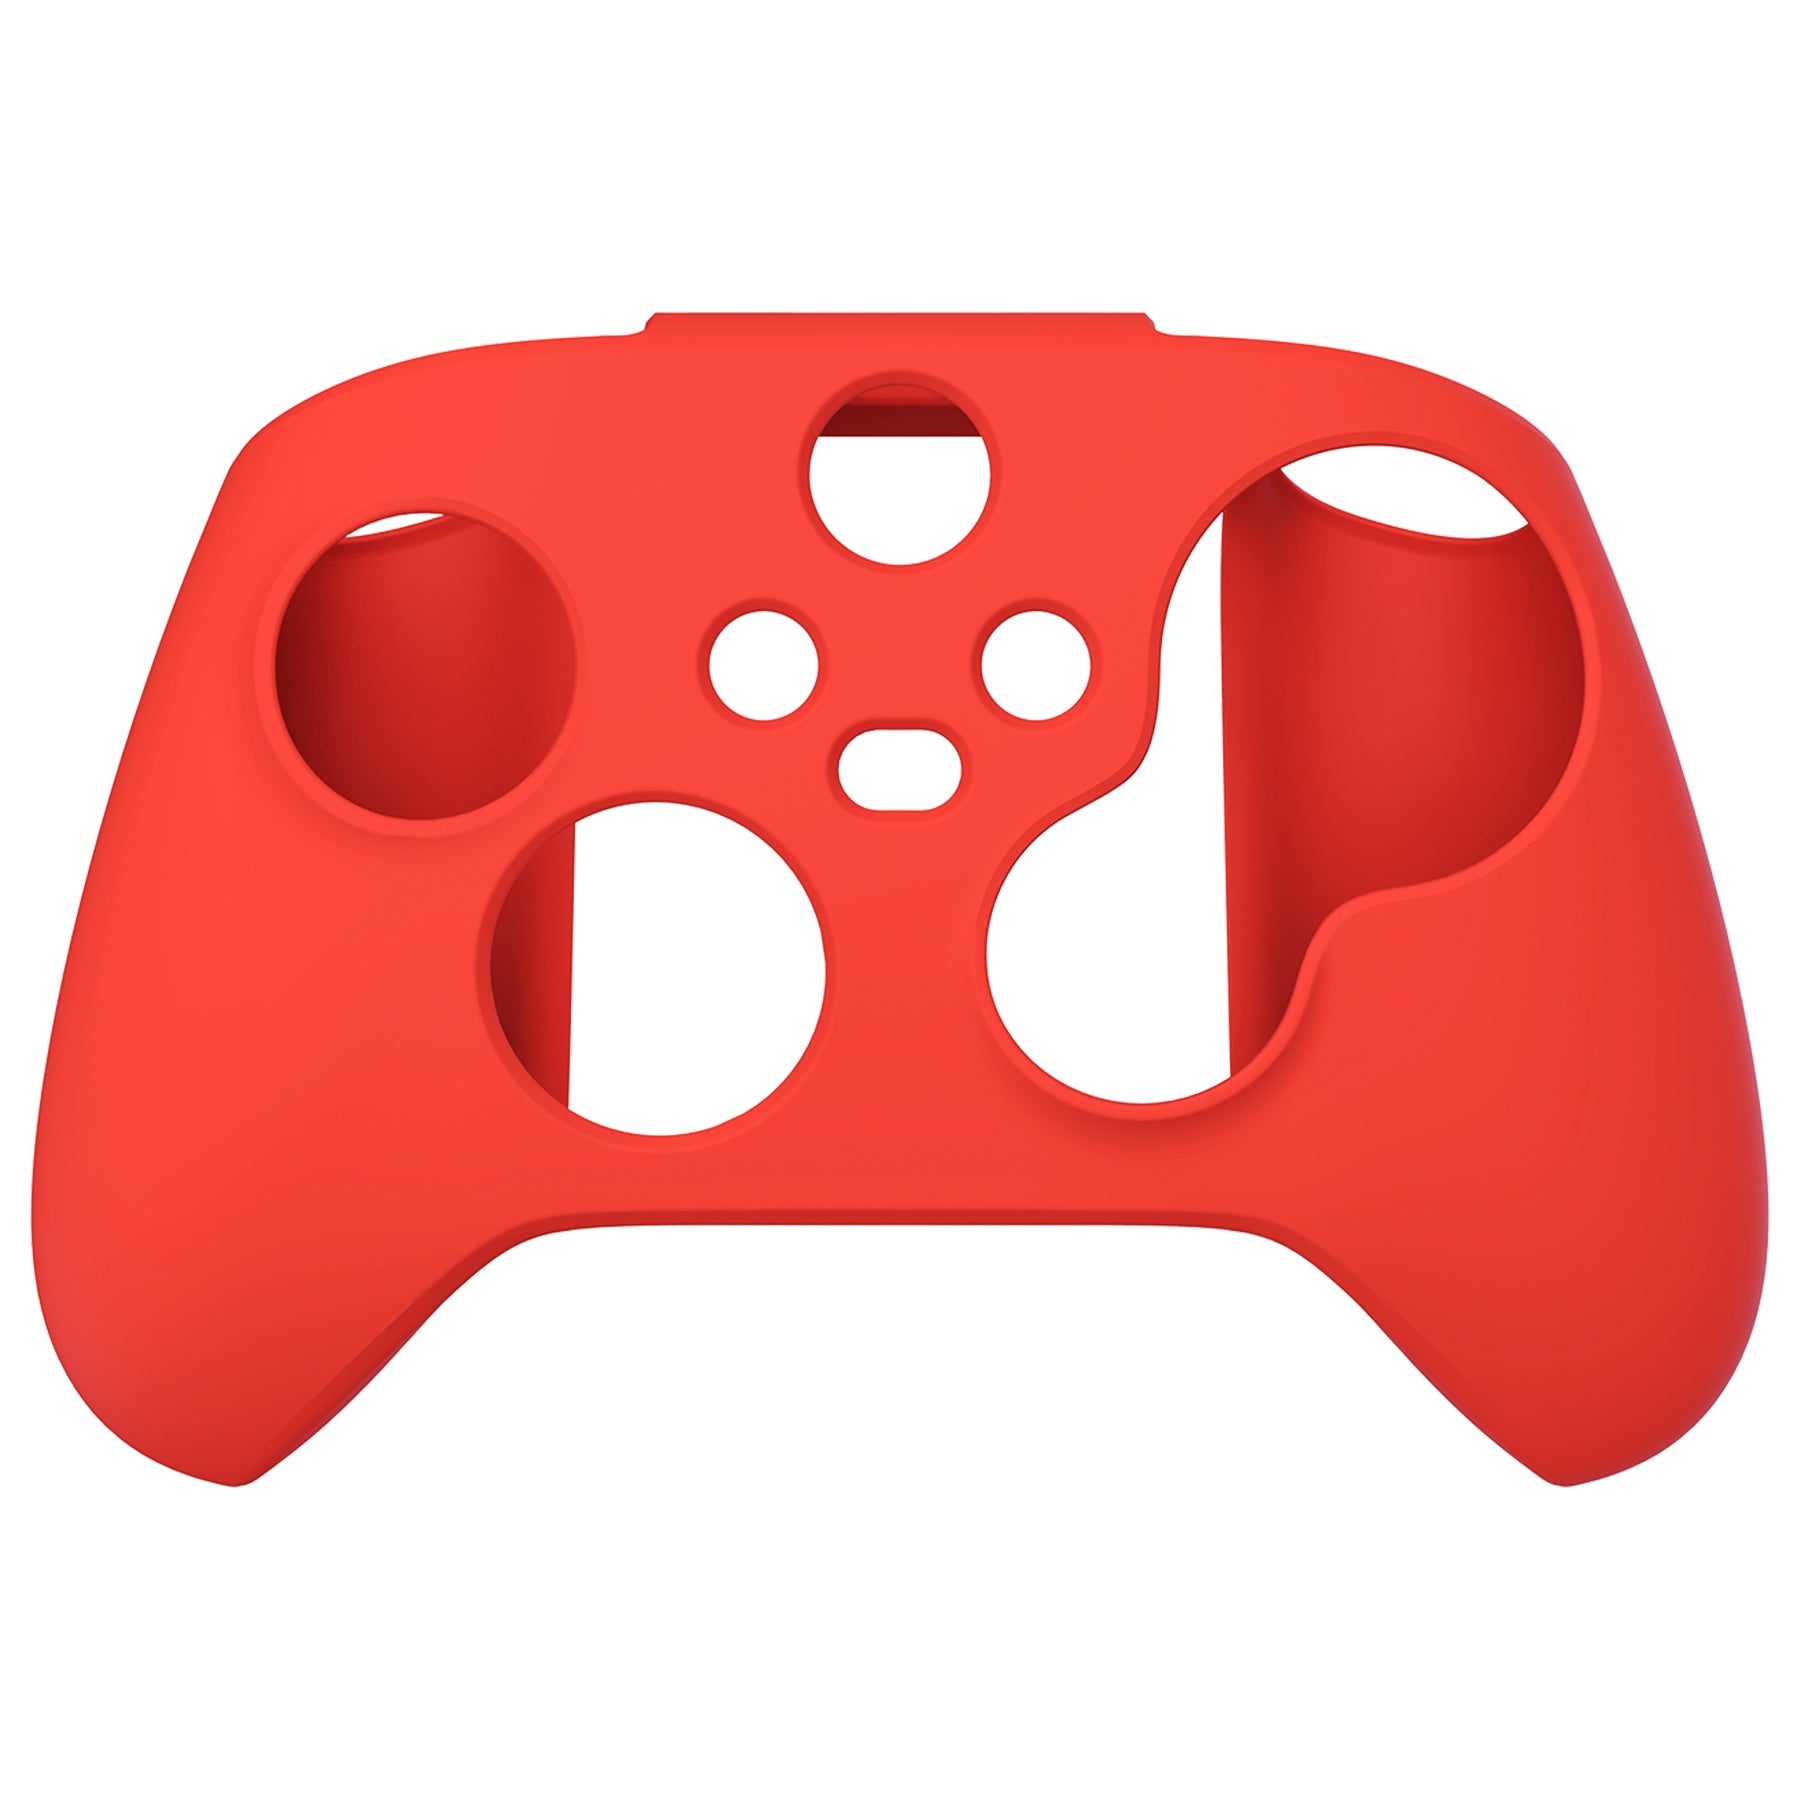 PlayVital Passion Red Pure Series Anti-Slip Silicone Cover Skin for Xbox Series X Controller, Soft Rubber Case Protector for Xbox Series S Controller with Black Thumb Grip Caps - BLX3012 PlayVital